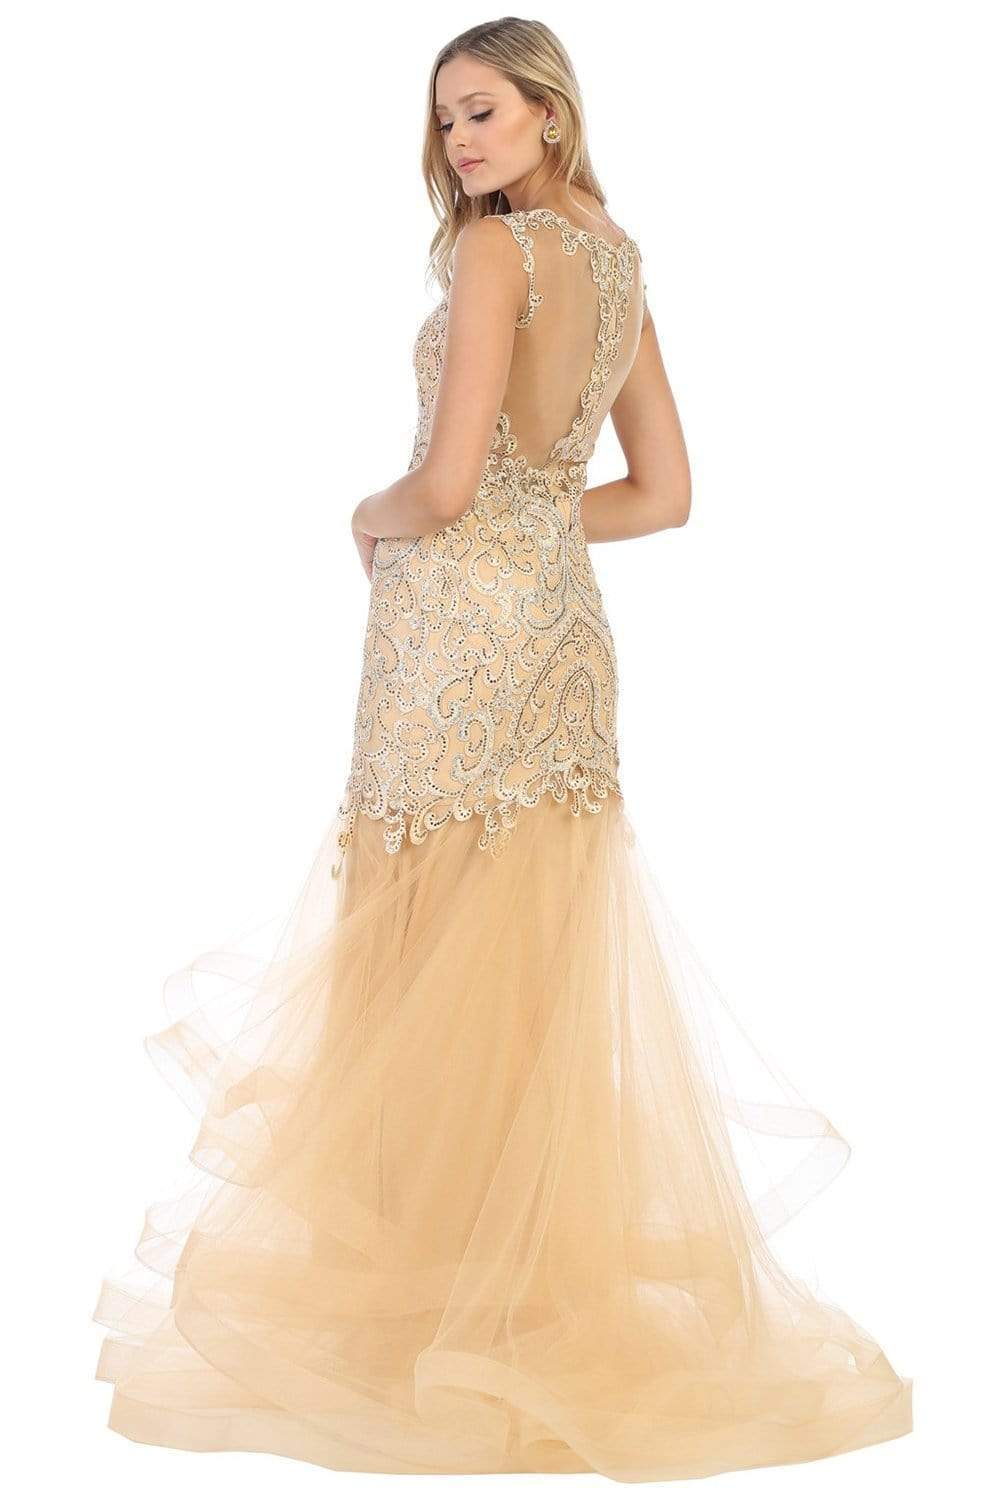 May Queen - RQ7778 Embroidered Ruffled Trumpet Dress Prom Dresses